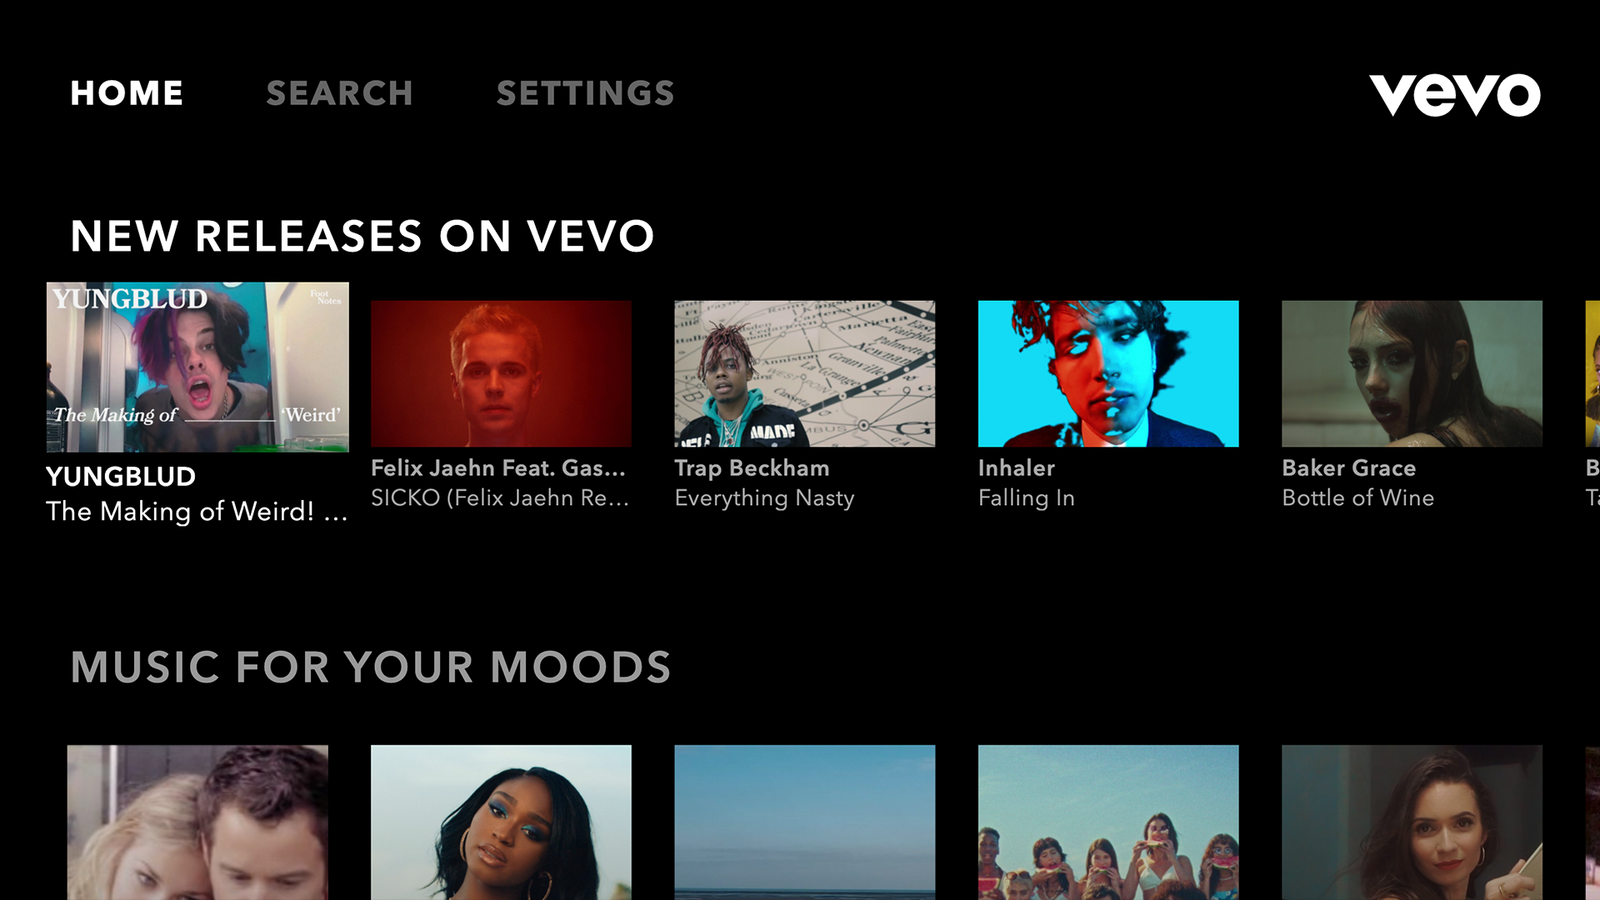 We distribute music videos to VEVO for all types of artists, newcomers, indies or more confirmed, from all over the world. Check out some of our latest VEVO releases below:

